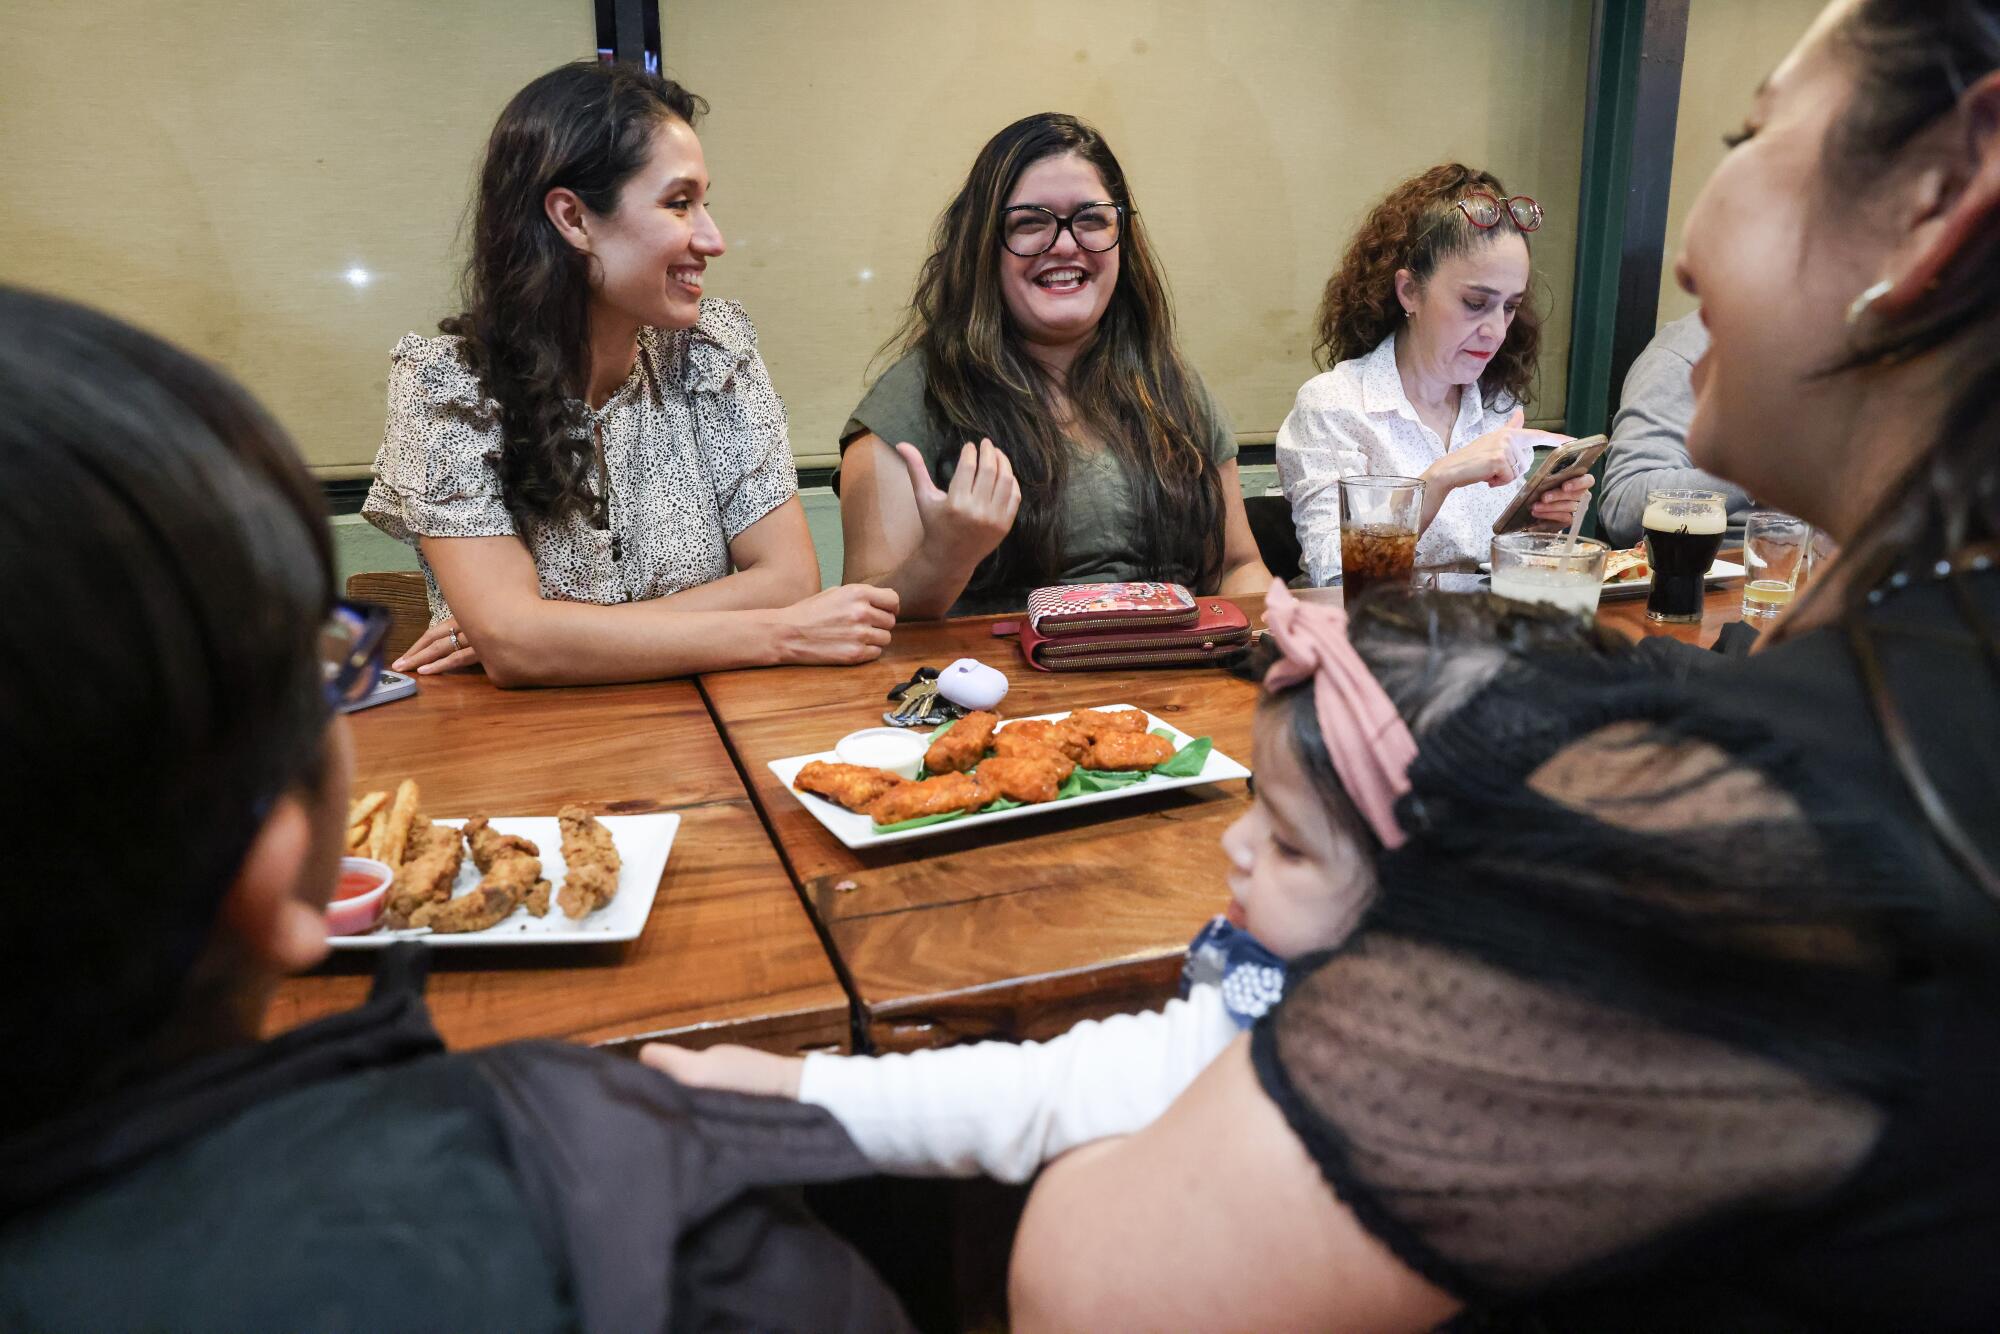 A group of smiling women converse while seated at tables with plates of food in front of them